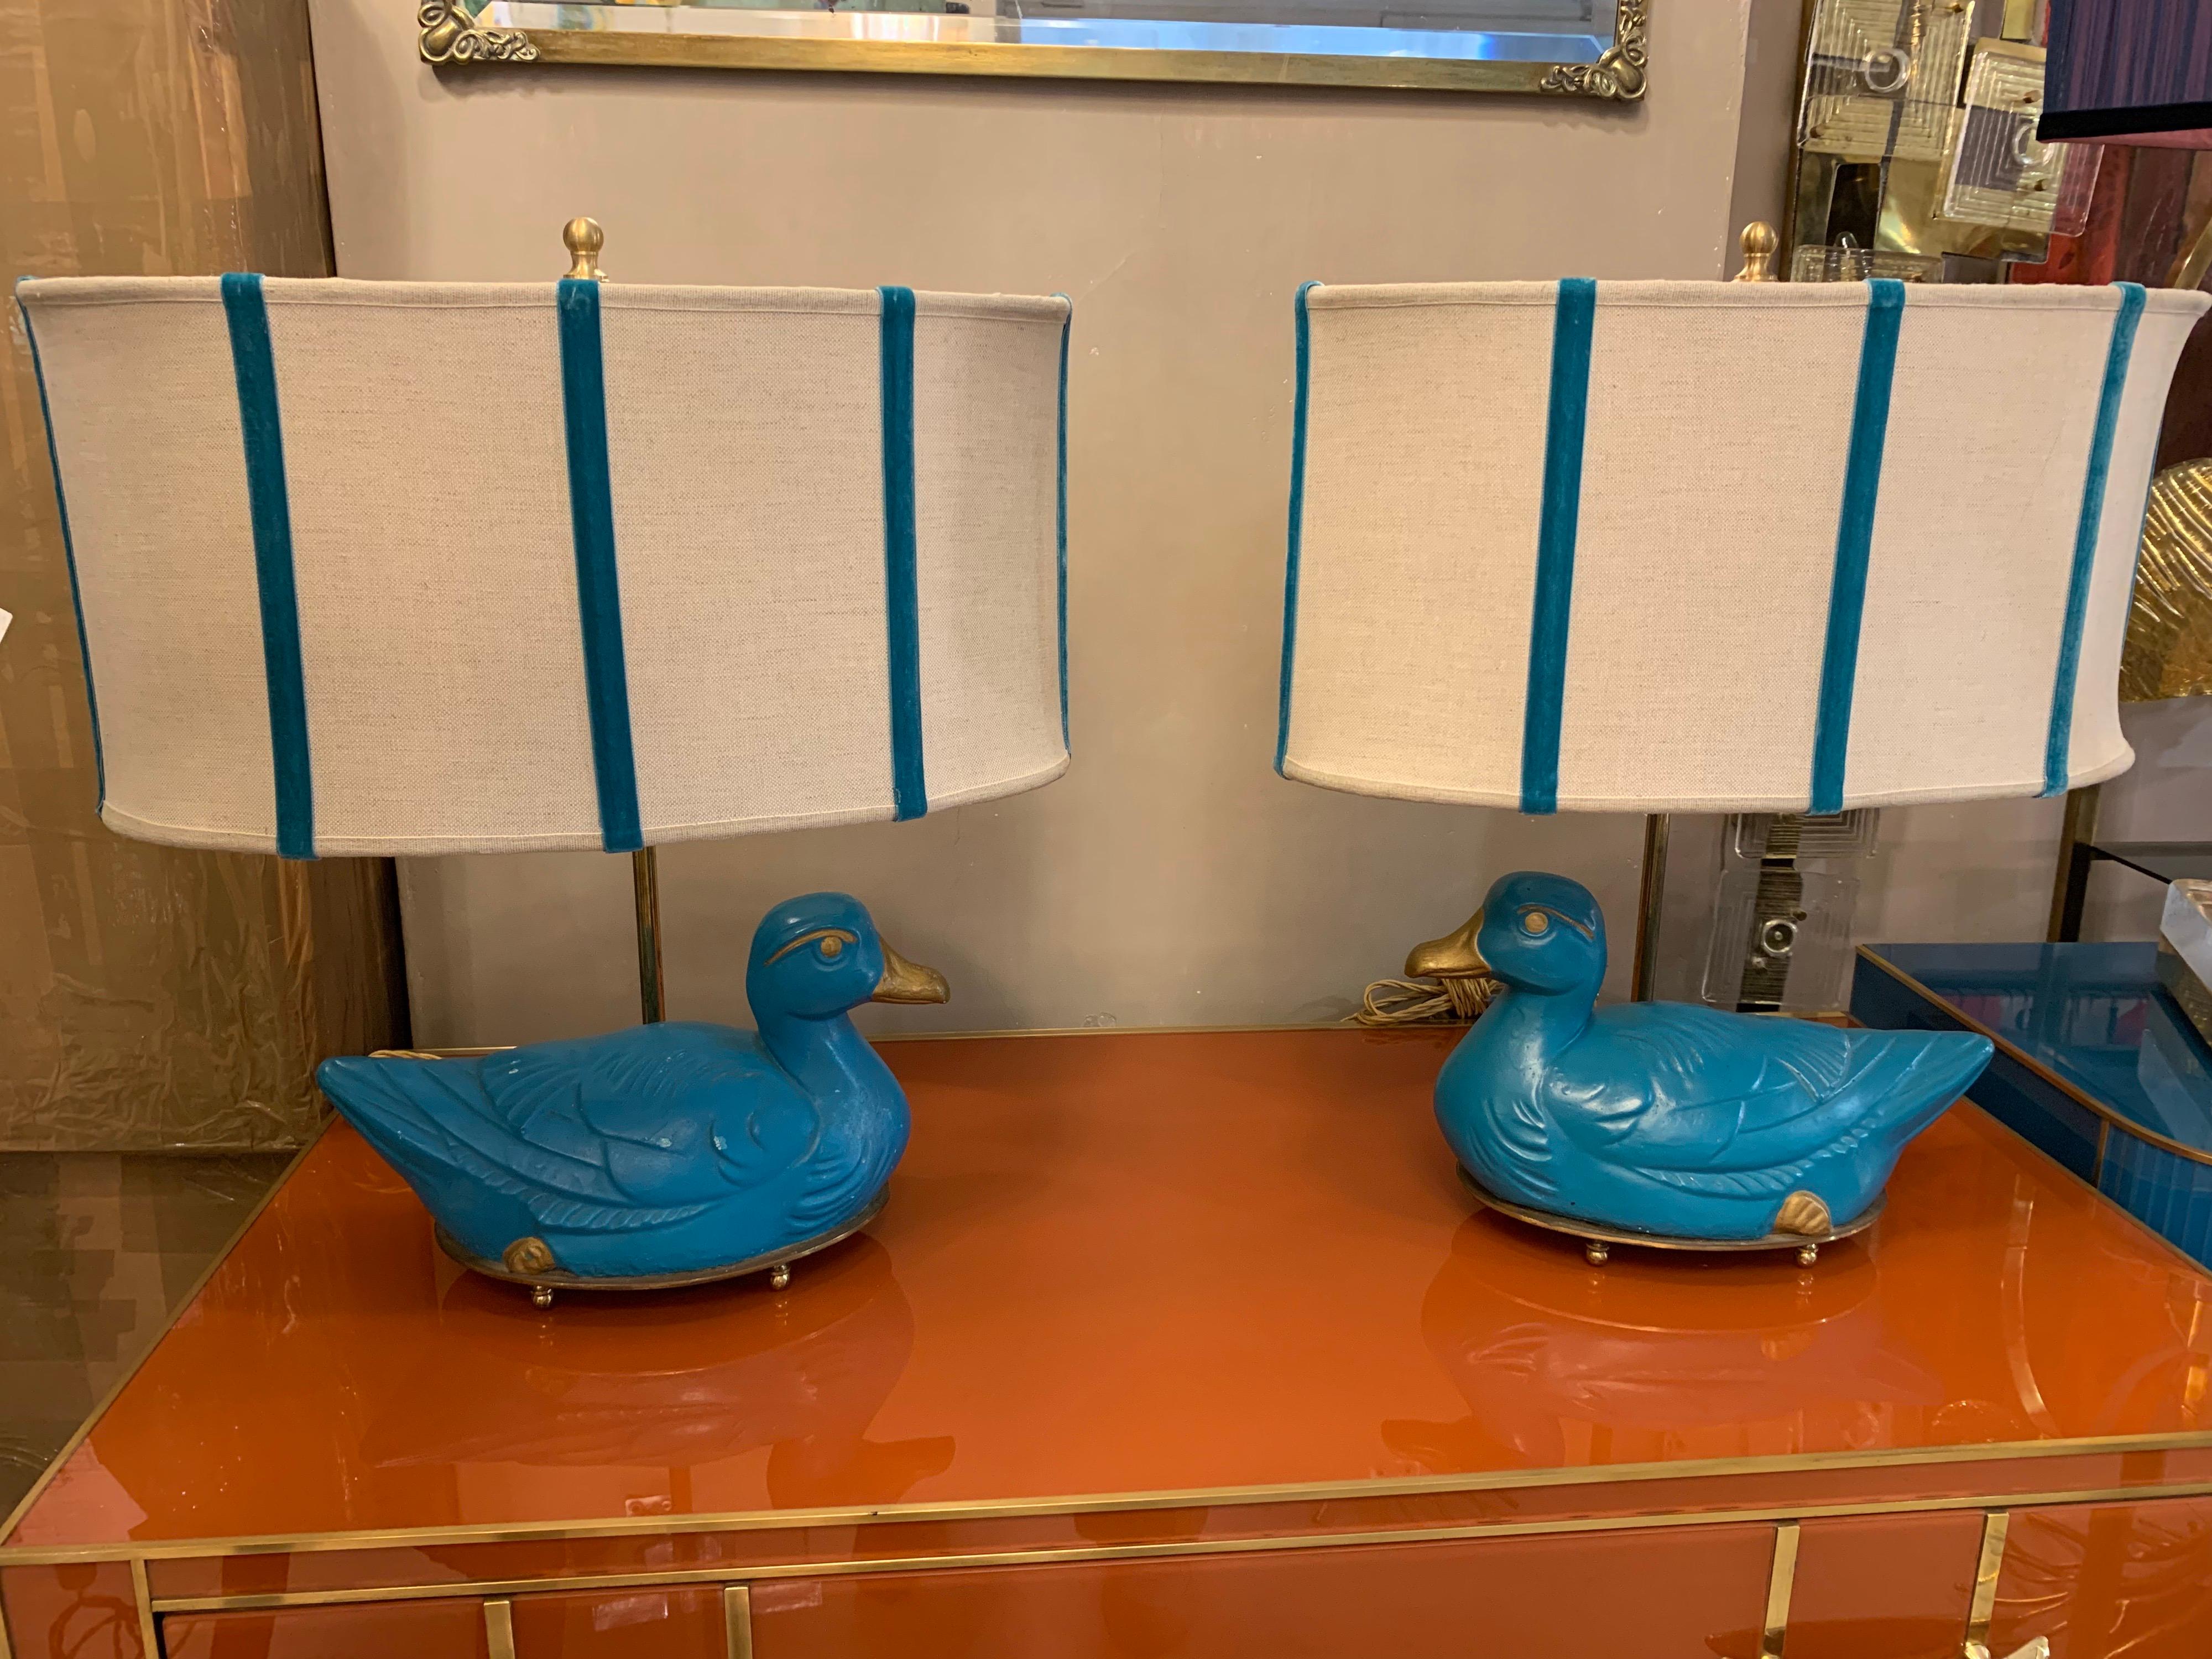 Pair of Mid-Century turquoise bronze table lamps in the shape of a duck with our lampshades, brass fittings. The duck is in bronze hand-painted in turquoise and gold and fixed to an oval brass structure.
The oval lampshades are hand-sewn and